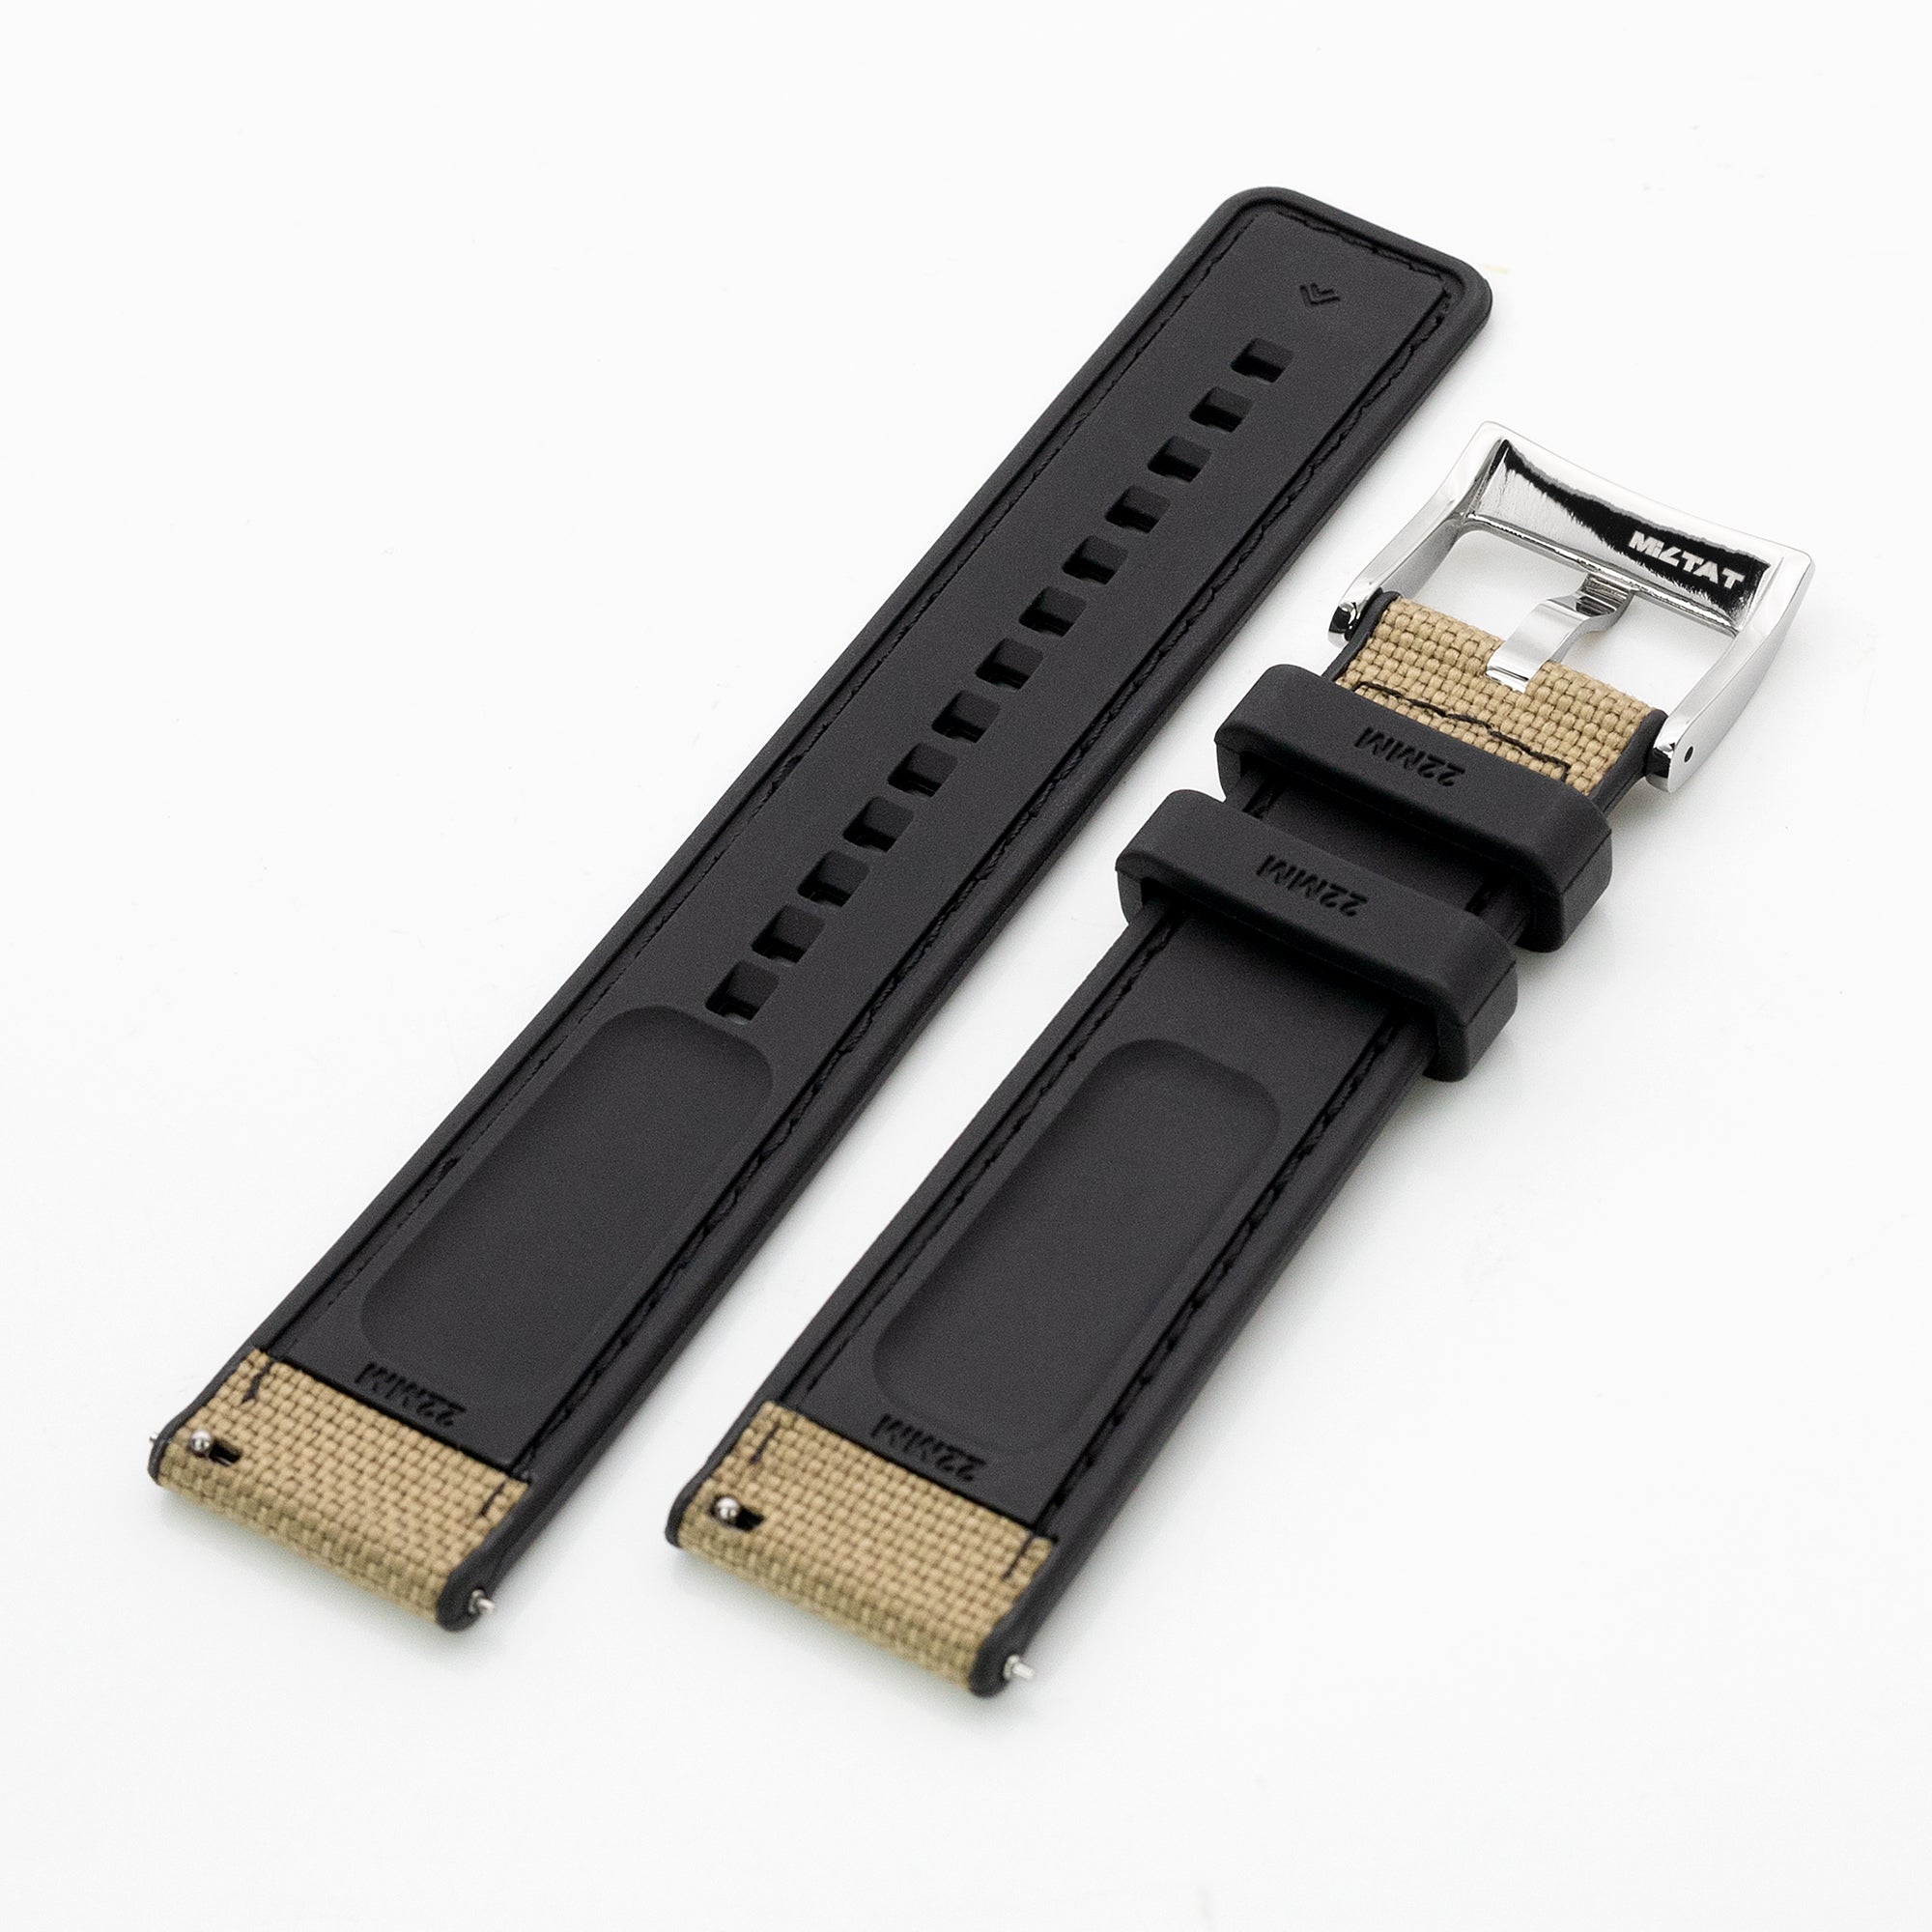 Tan / Khaki Quick Release Hybrid Sailcloth FKM Rubber Sports Watch Strap, 20mm or 22mm Strapcode Watch Bands